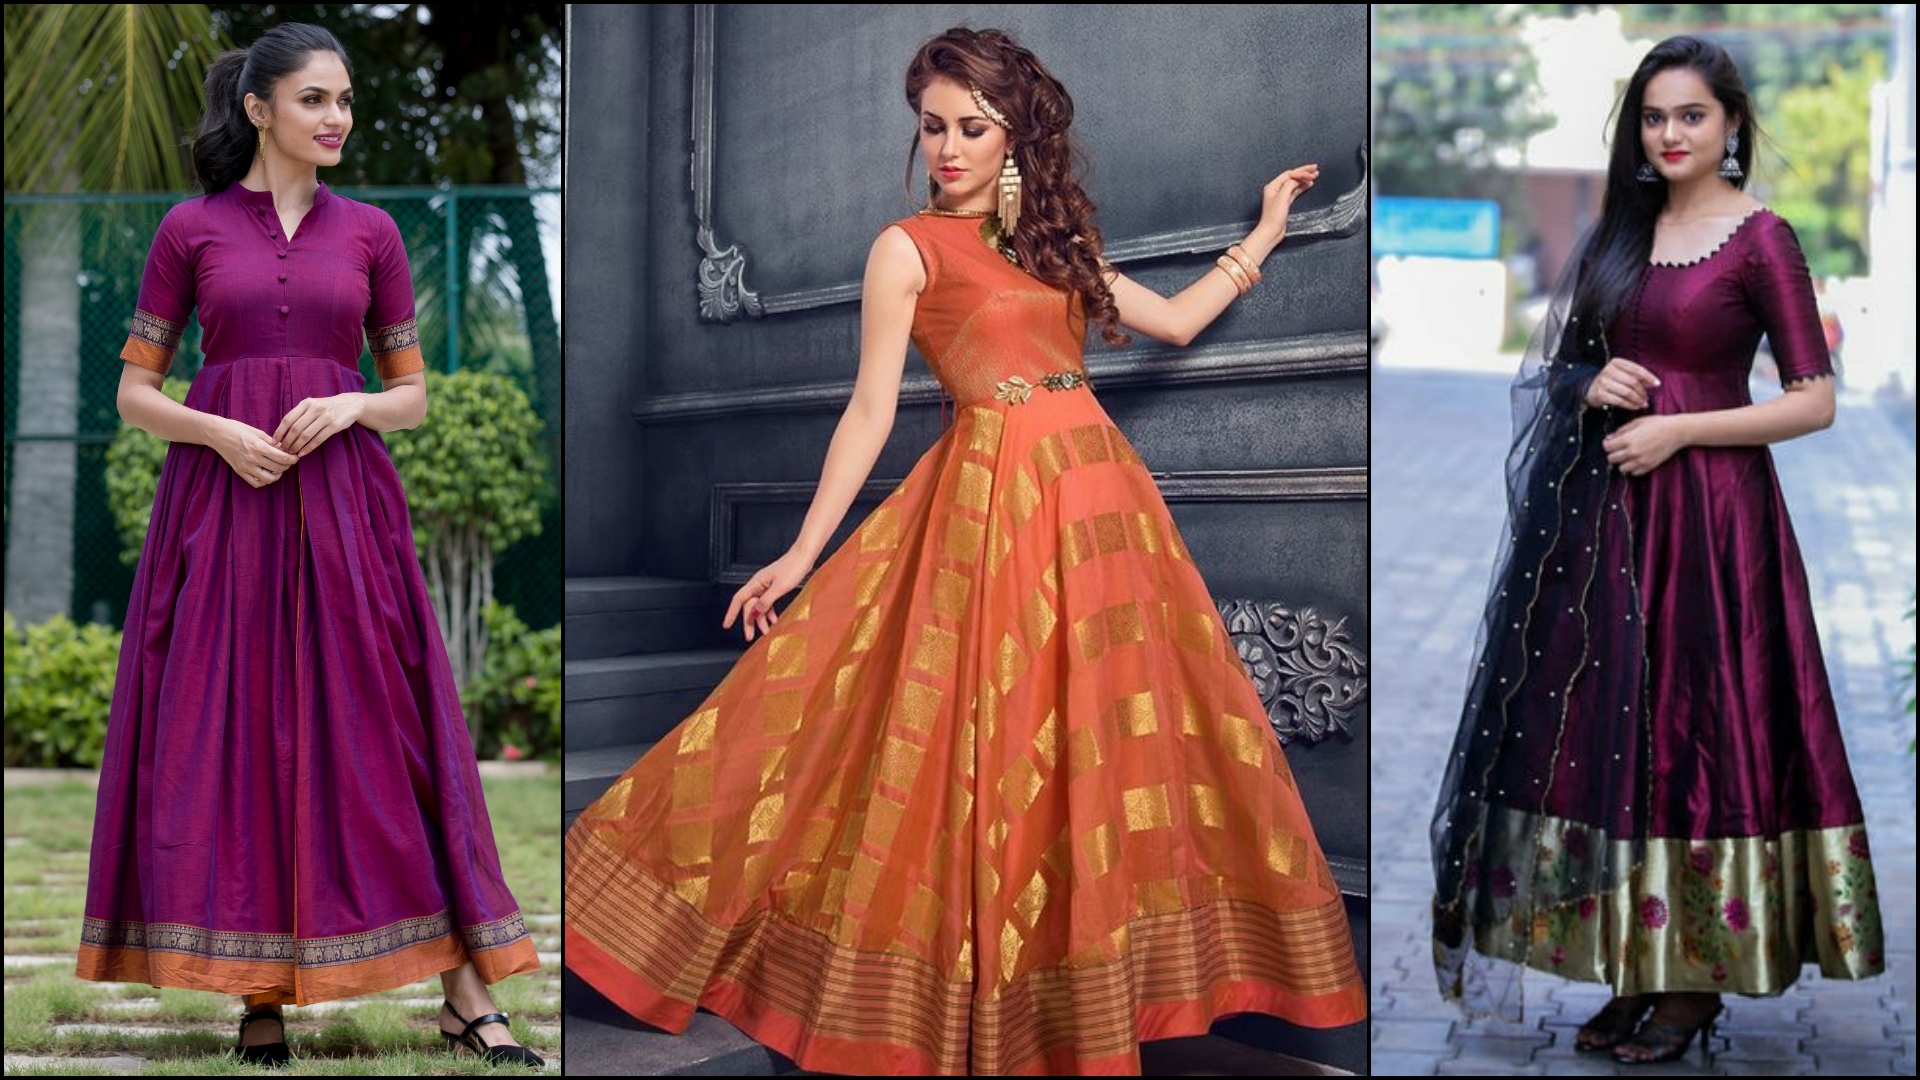 9 Ideas to Make Dresses From Old Sarees - DIY Dress-Up